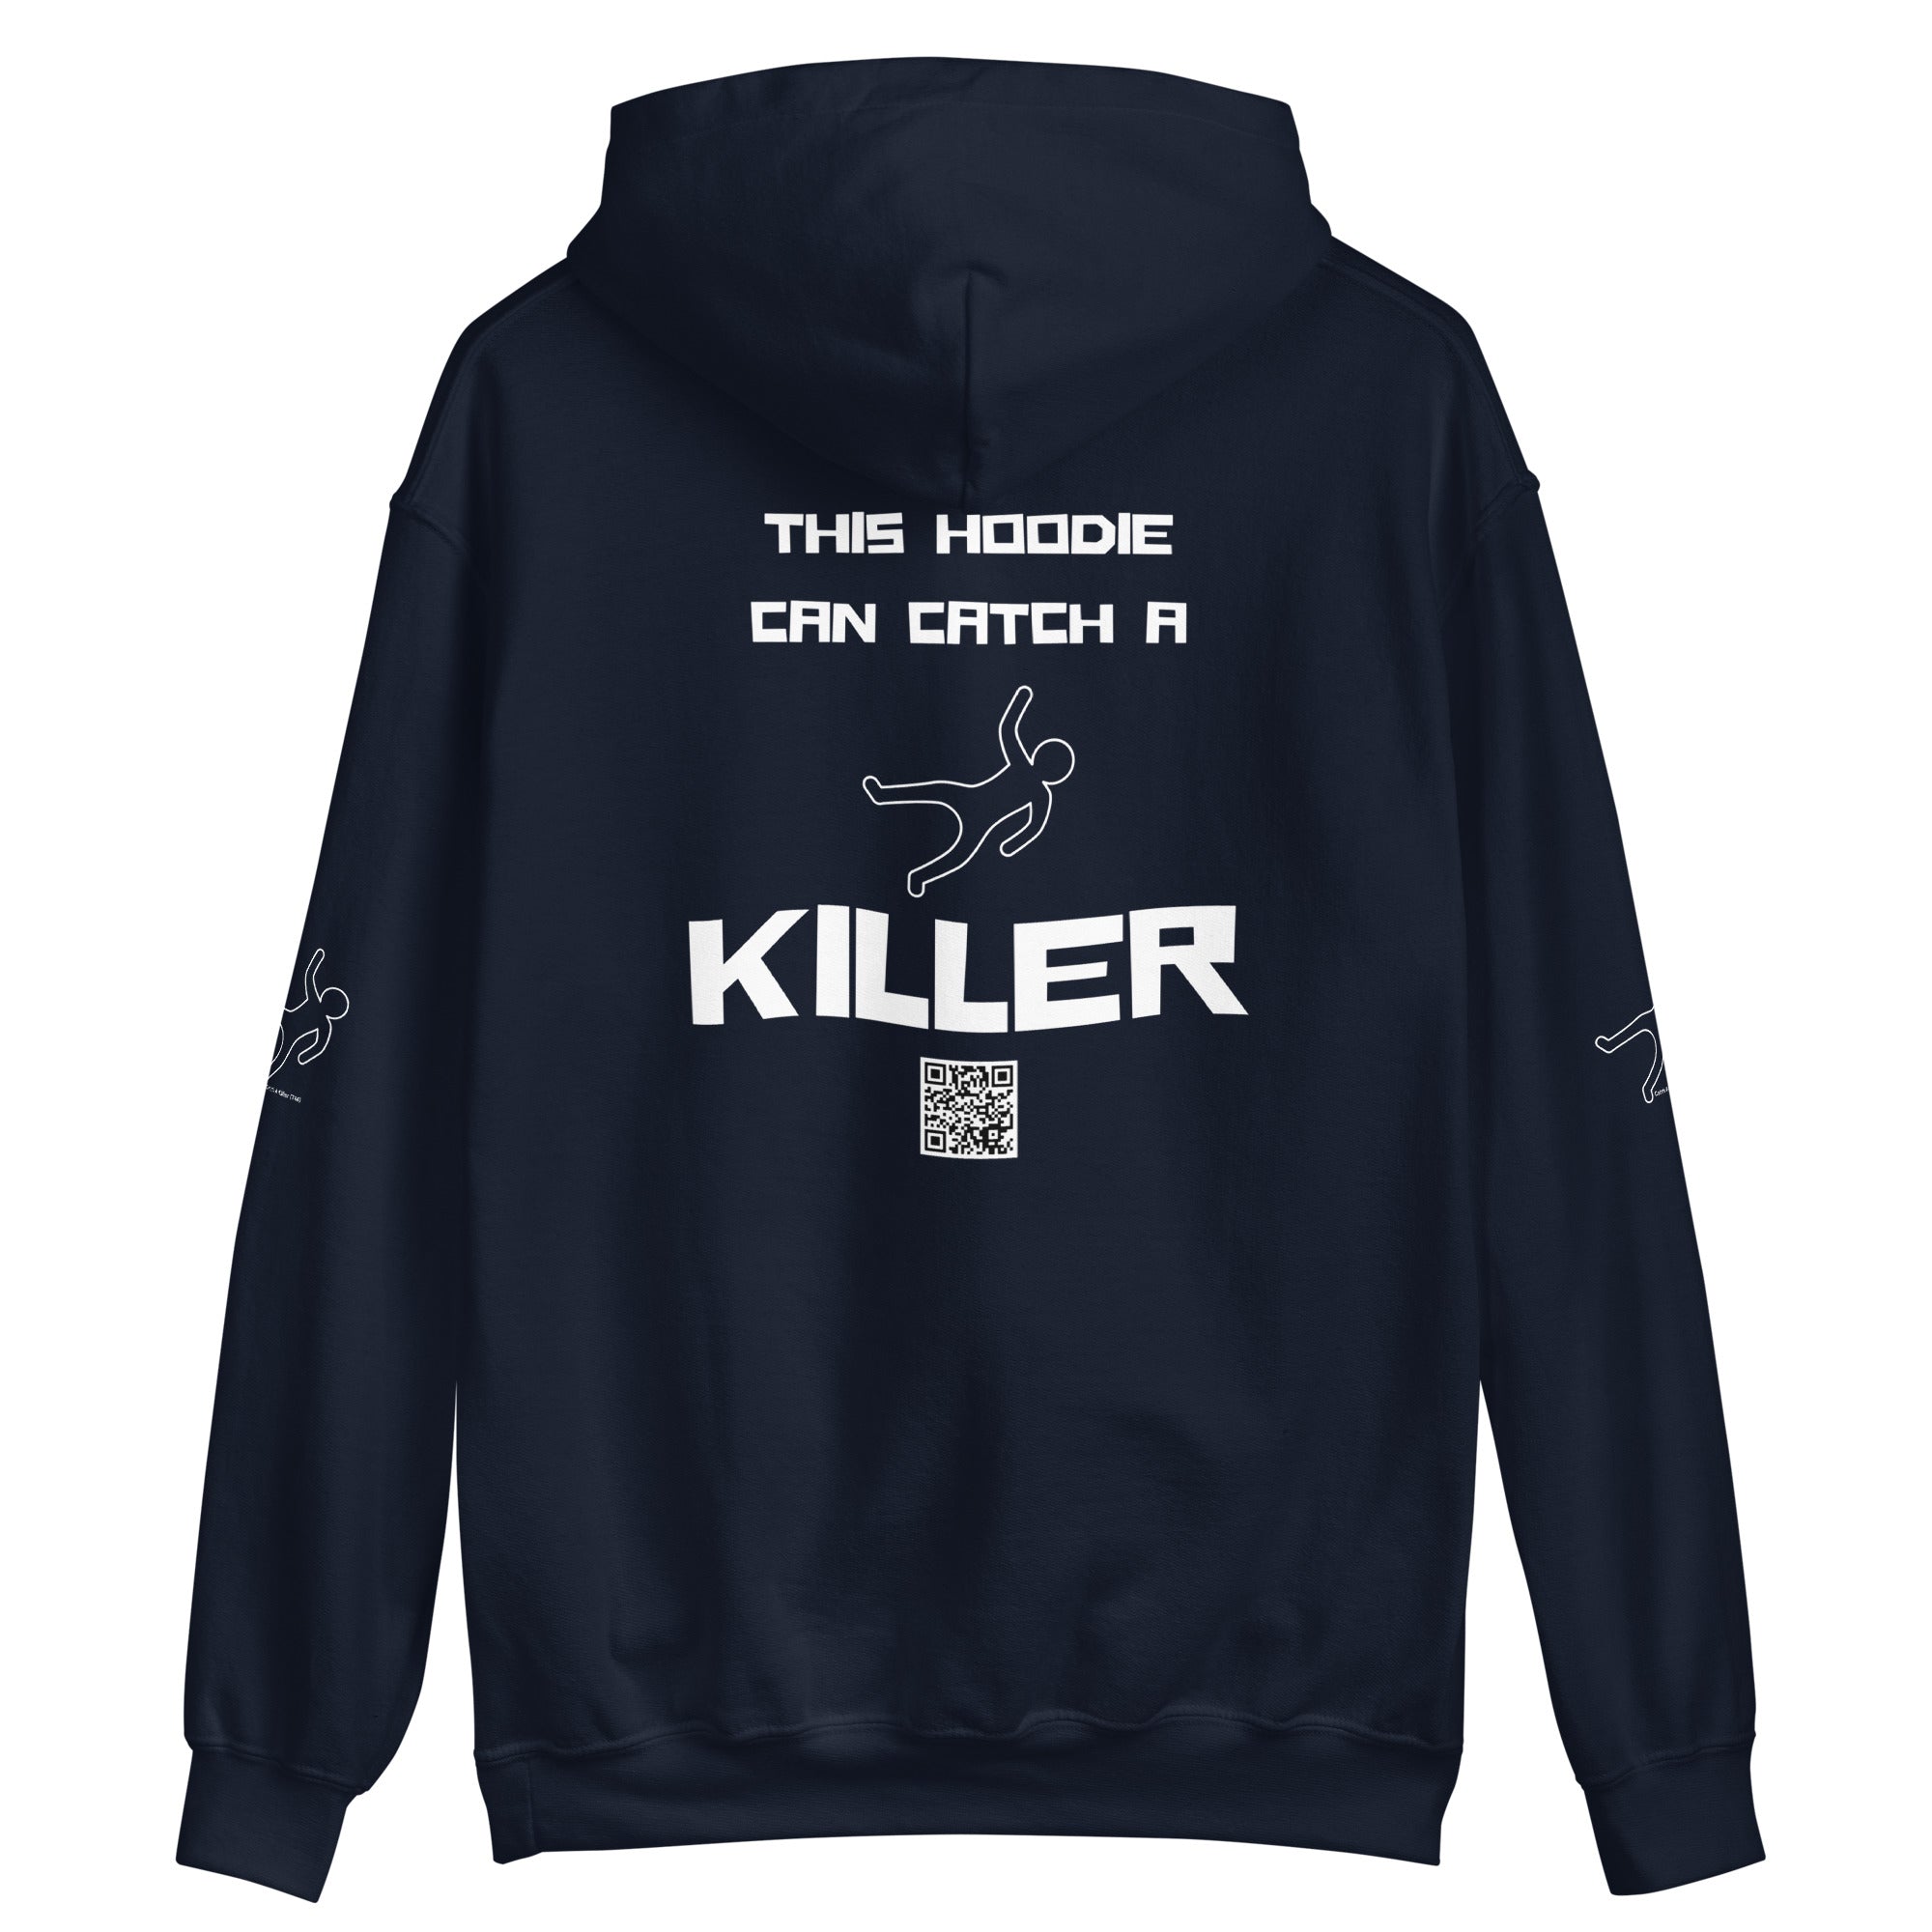 Catch A Killer (TM) - Unisex Hoodie - This Hoodie Can Catch A Killer (TM) WHITE